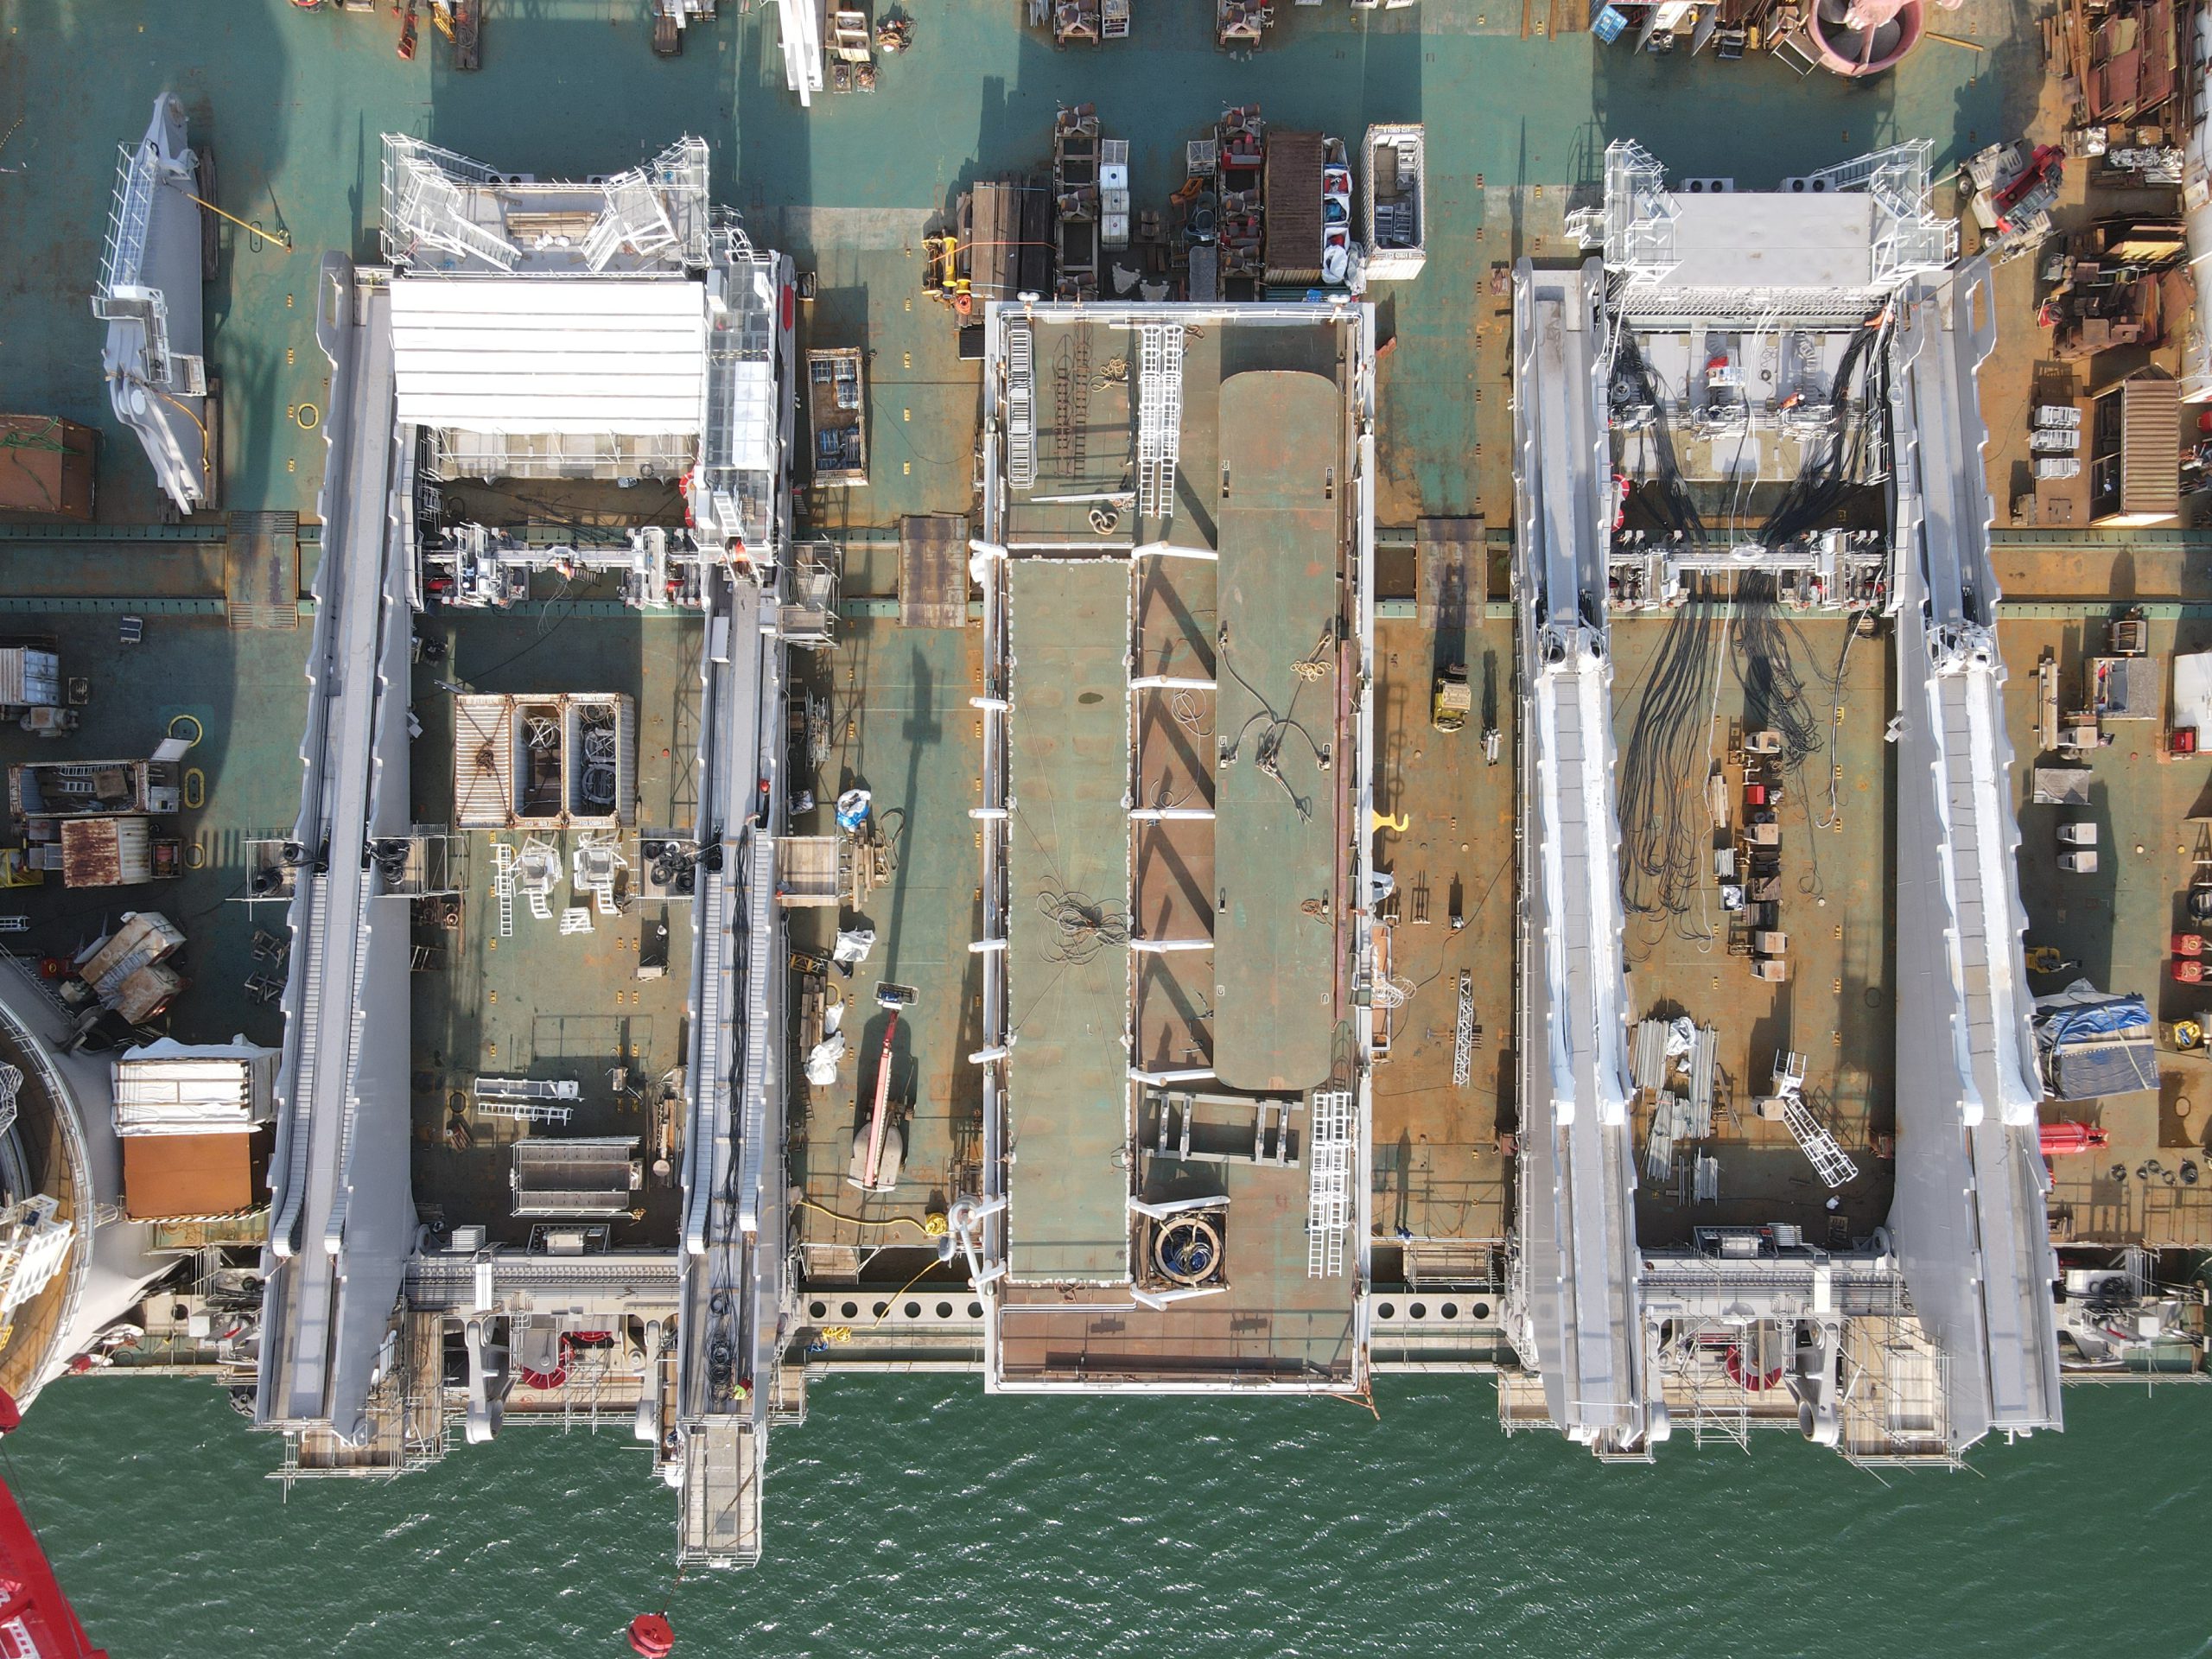 [VIDEO] Pioneering Spirit’s new jacket lift system nears completion